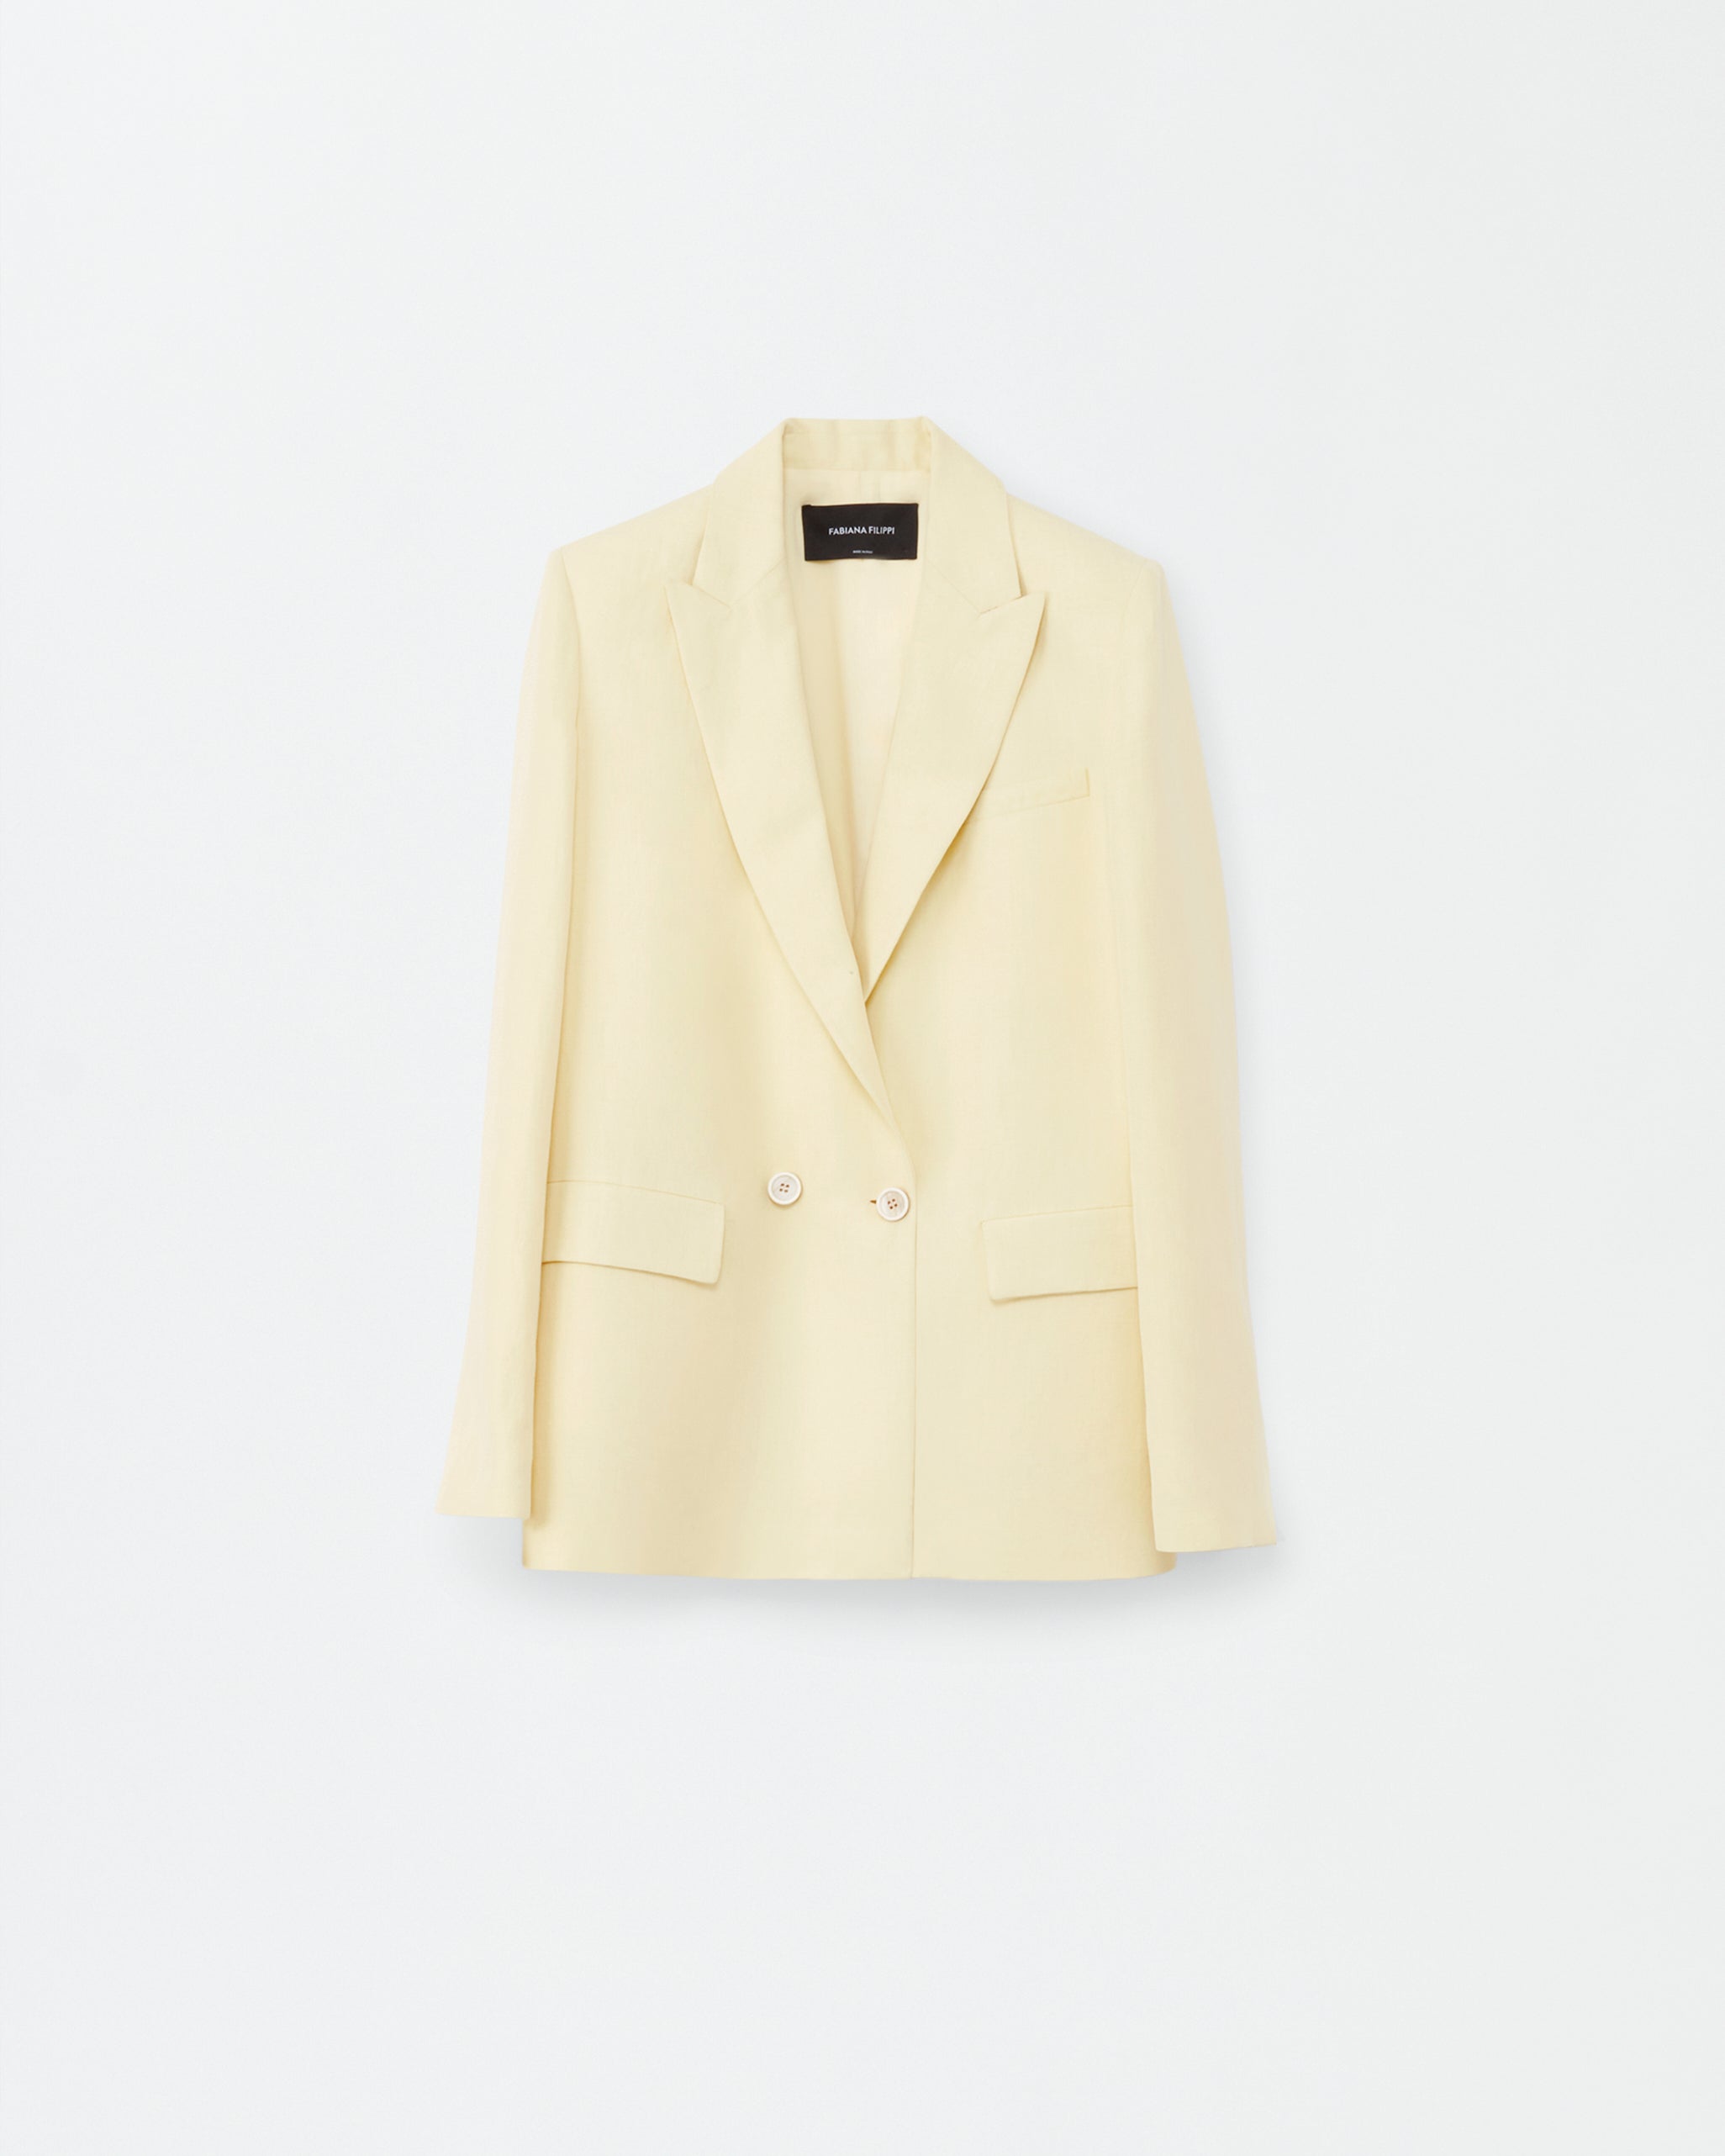 Viscose and linen double-breasted jacket, yellow